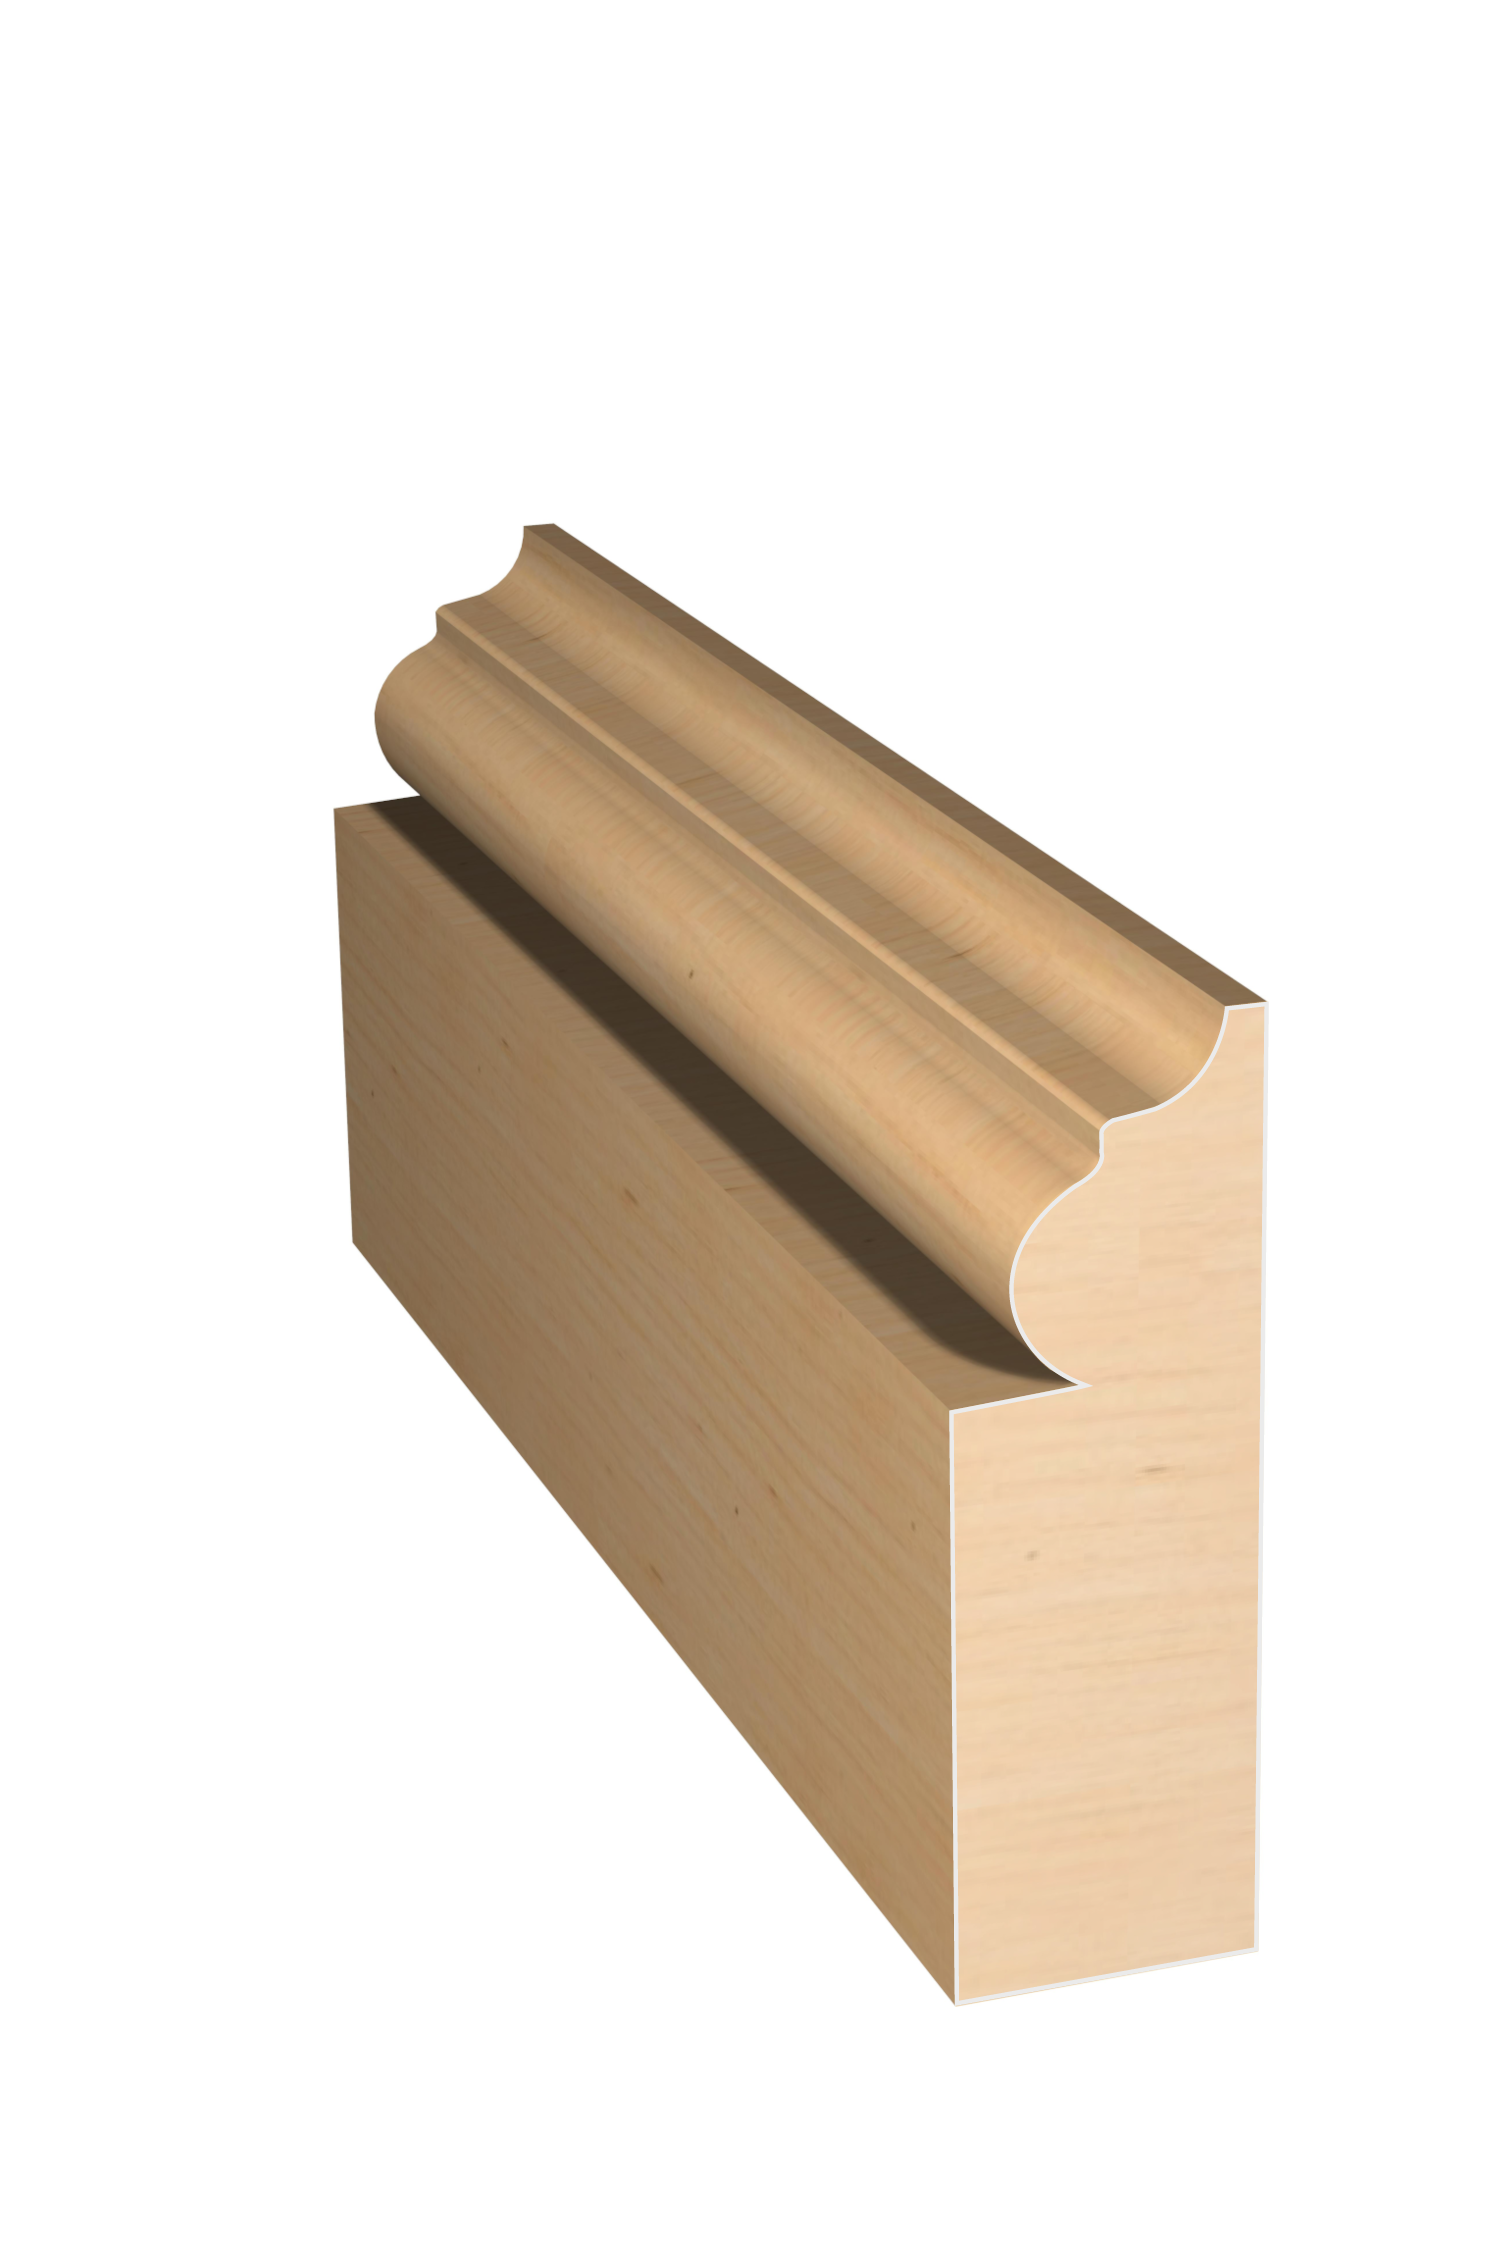 Three dimensional rendering of custom casing wood molding CAPL21227 made by Public Lumber Company in Detroit.